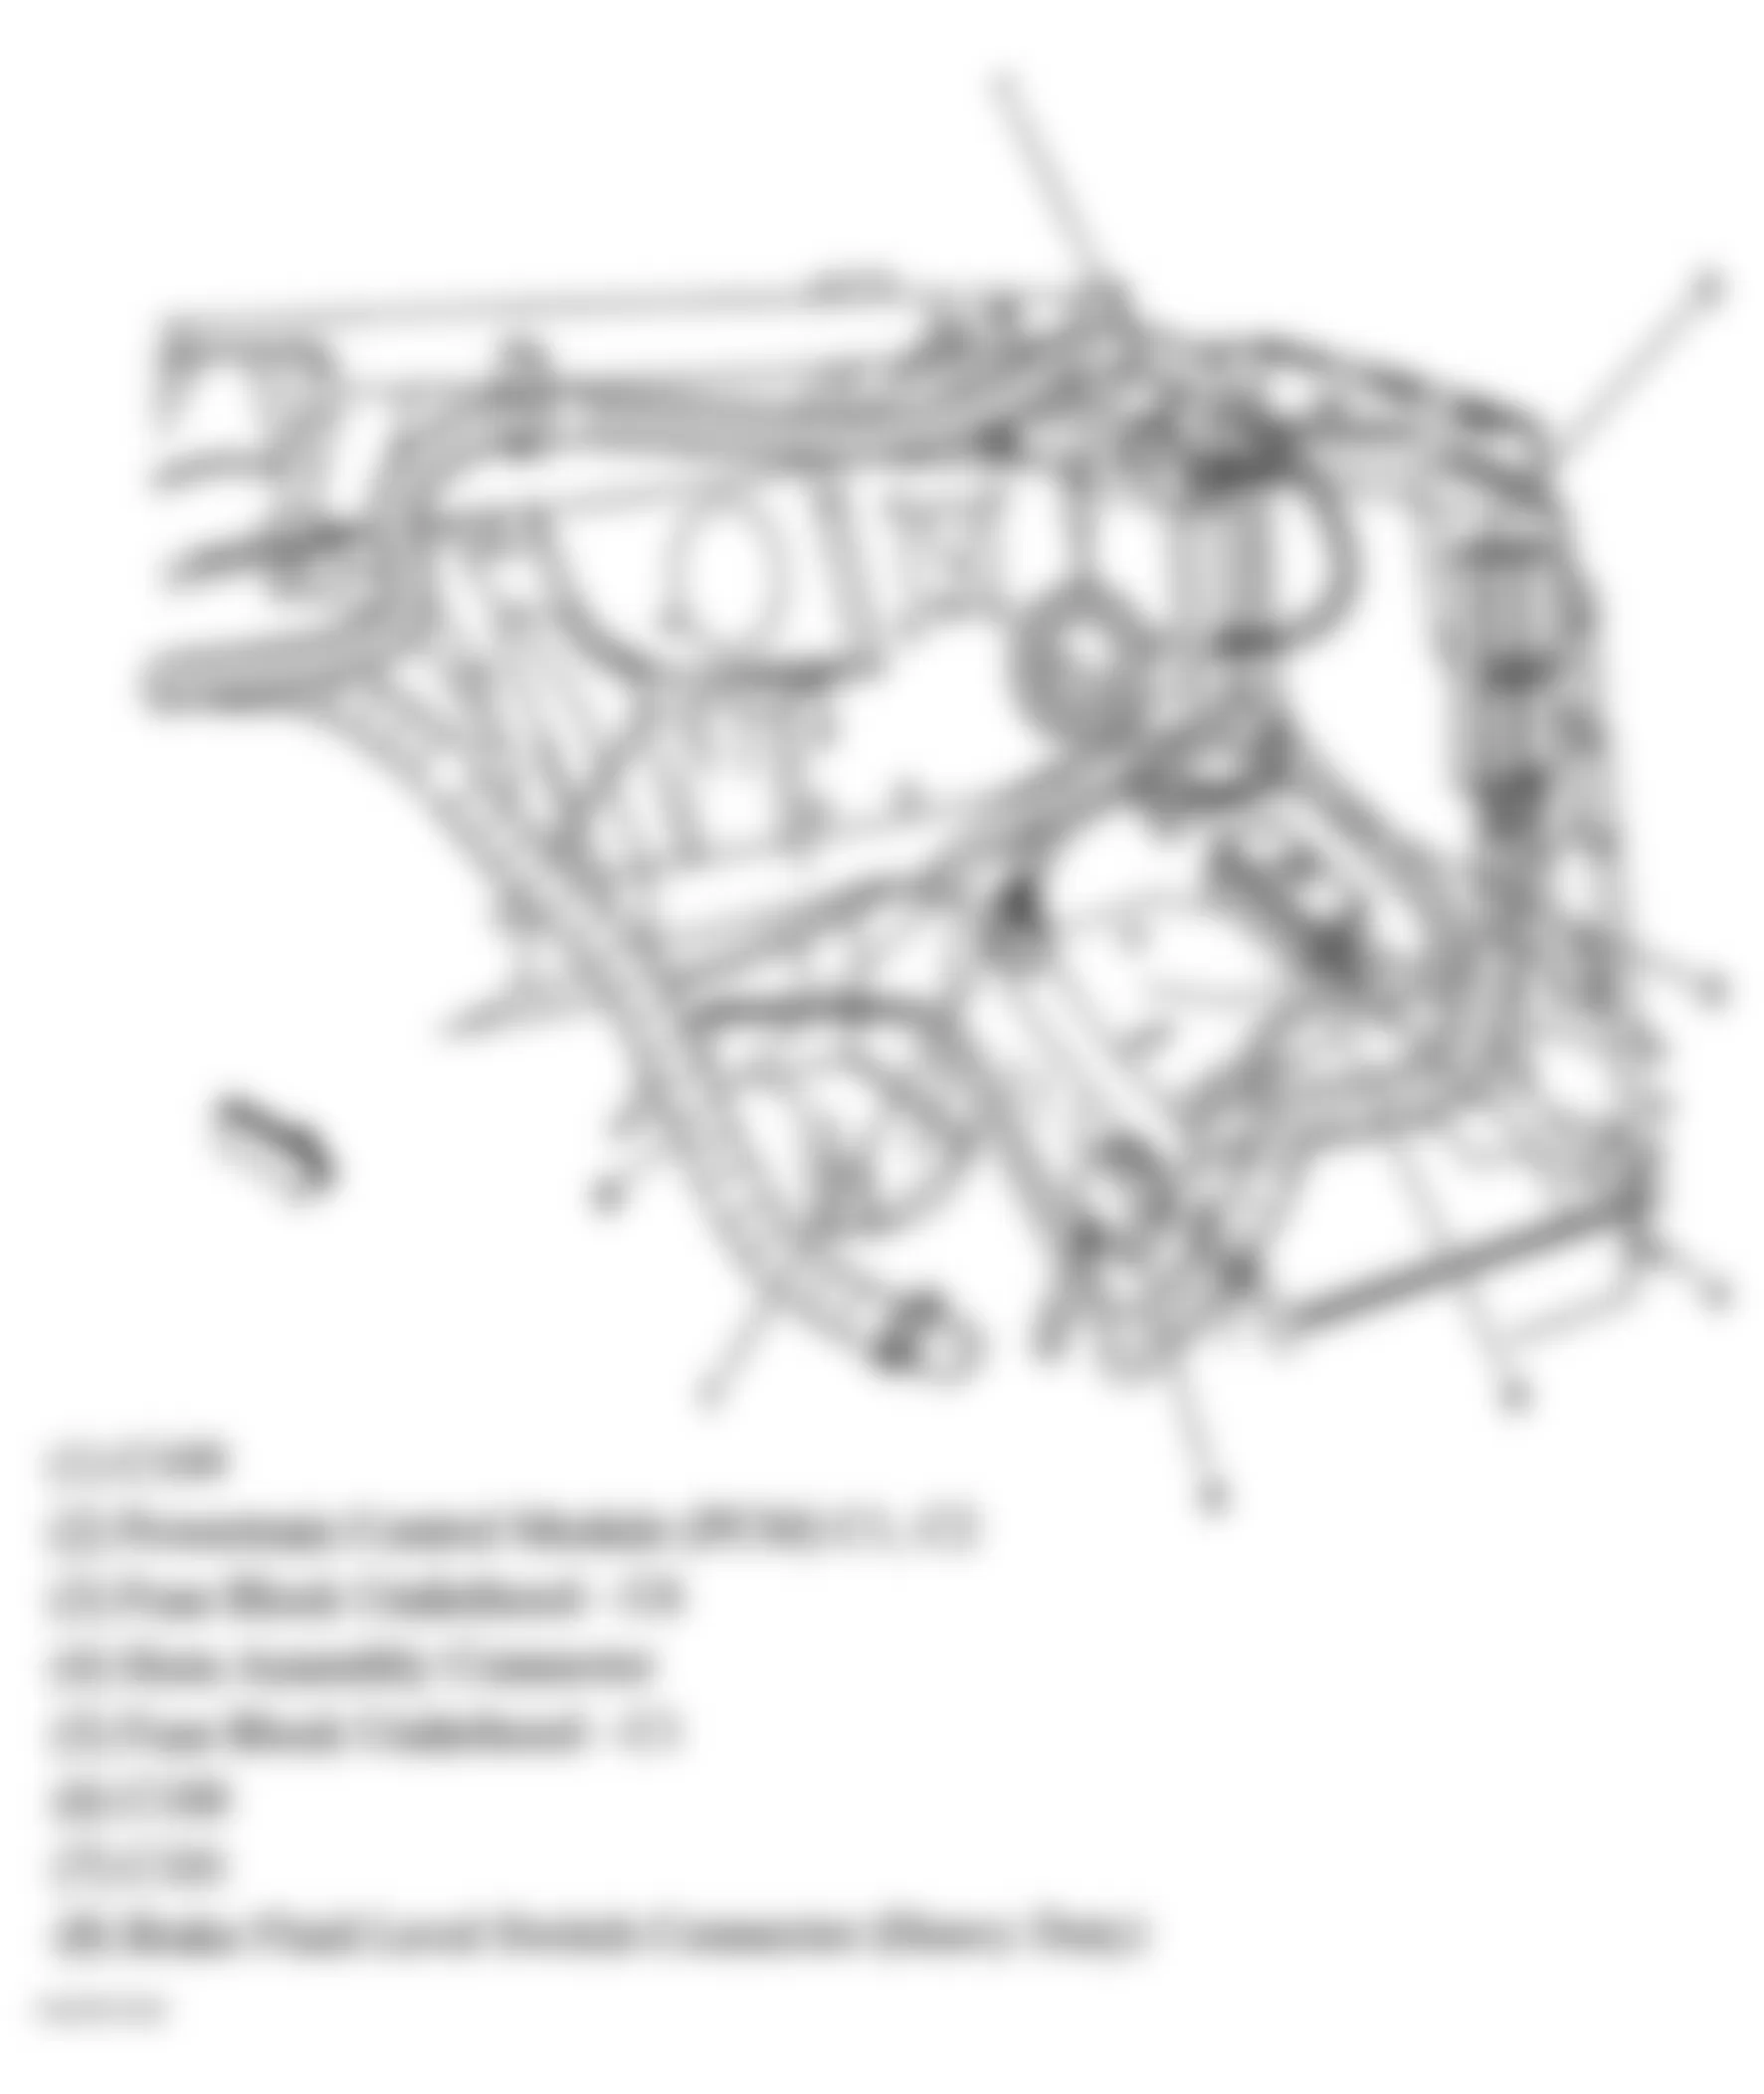 GMC Savana G3500 2006 - Component Locations -  Left Rear Of Engine Compartment